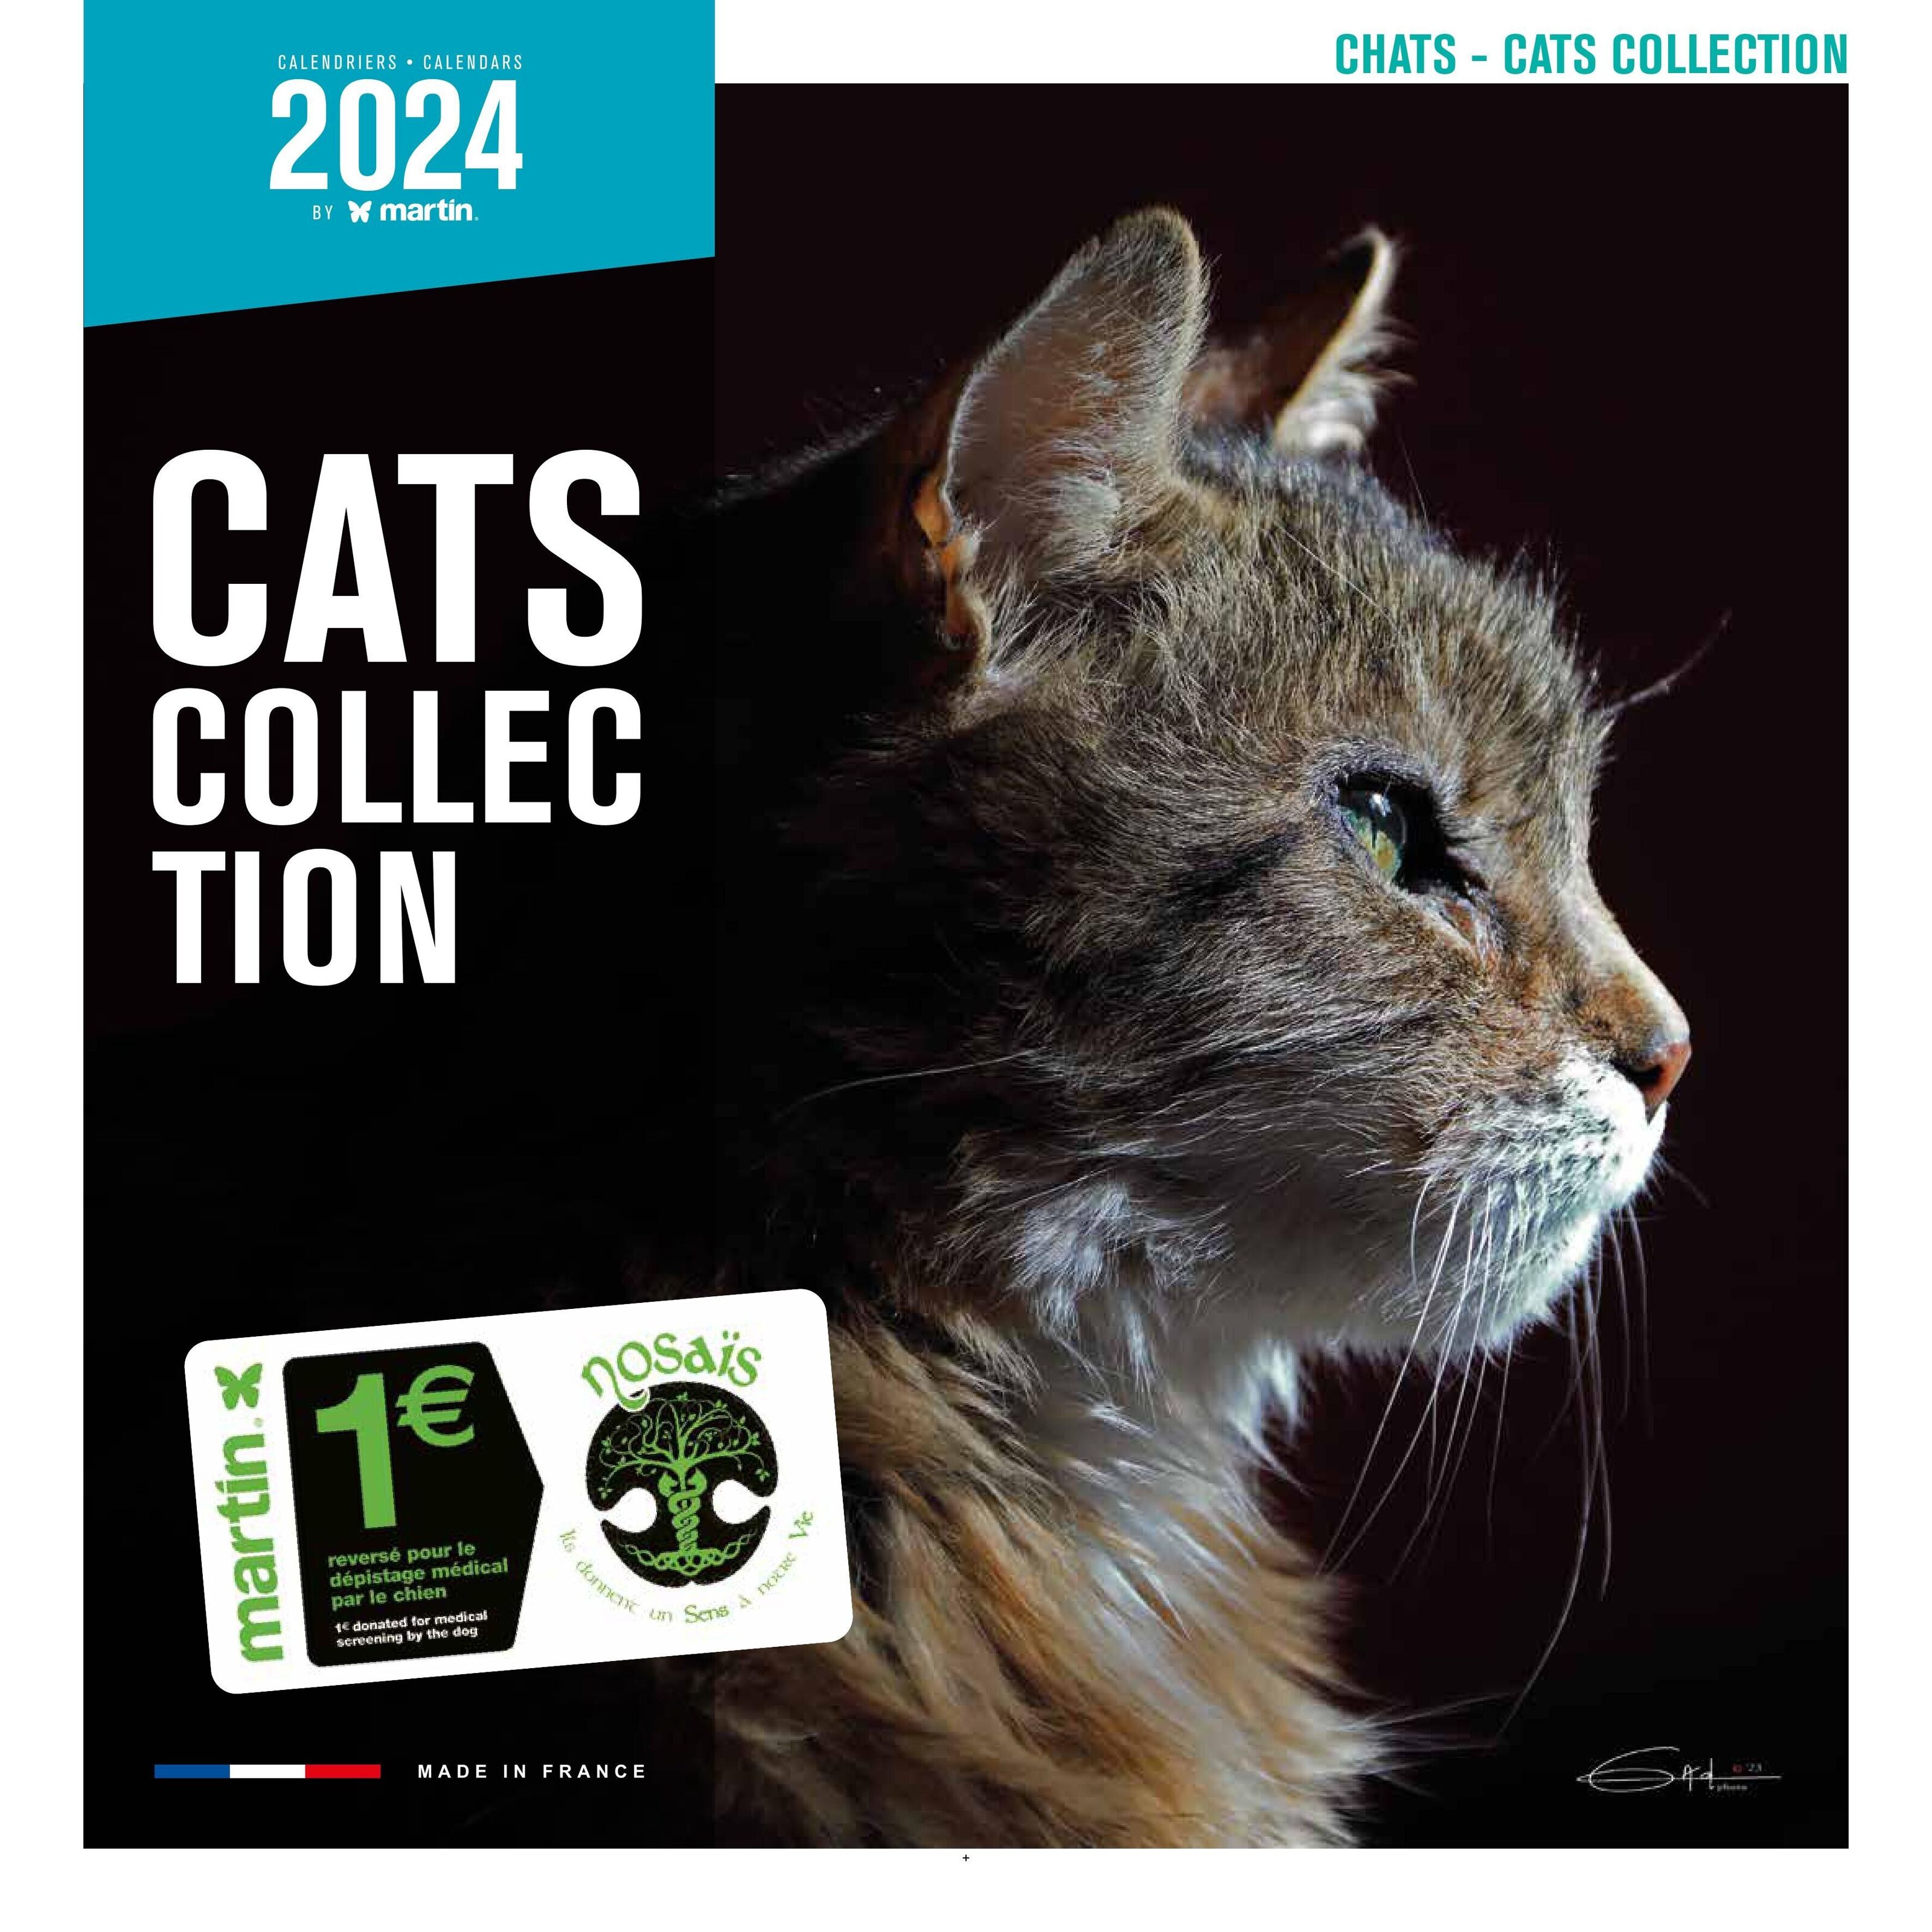 Achat Calendrier 2024 Chats (ms) en gros